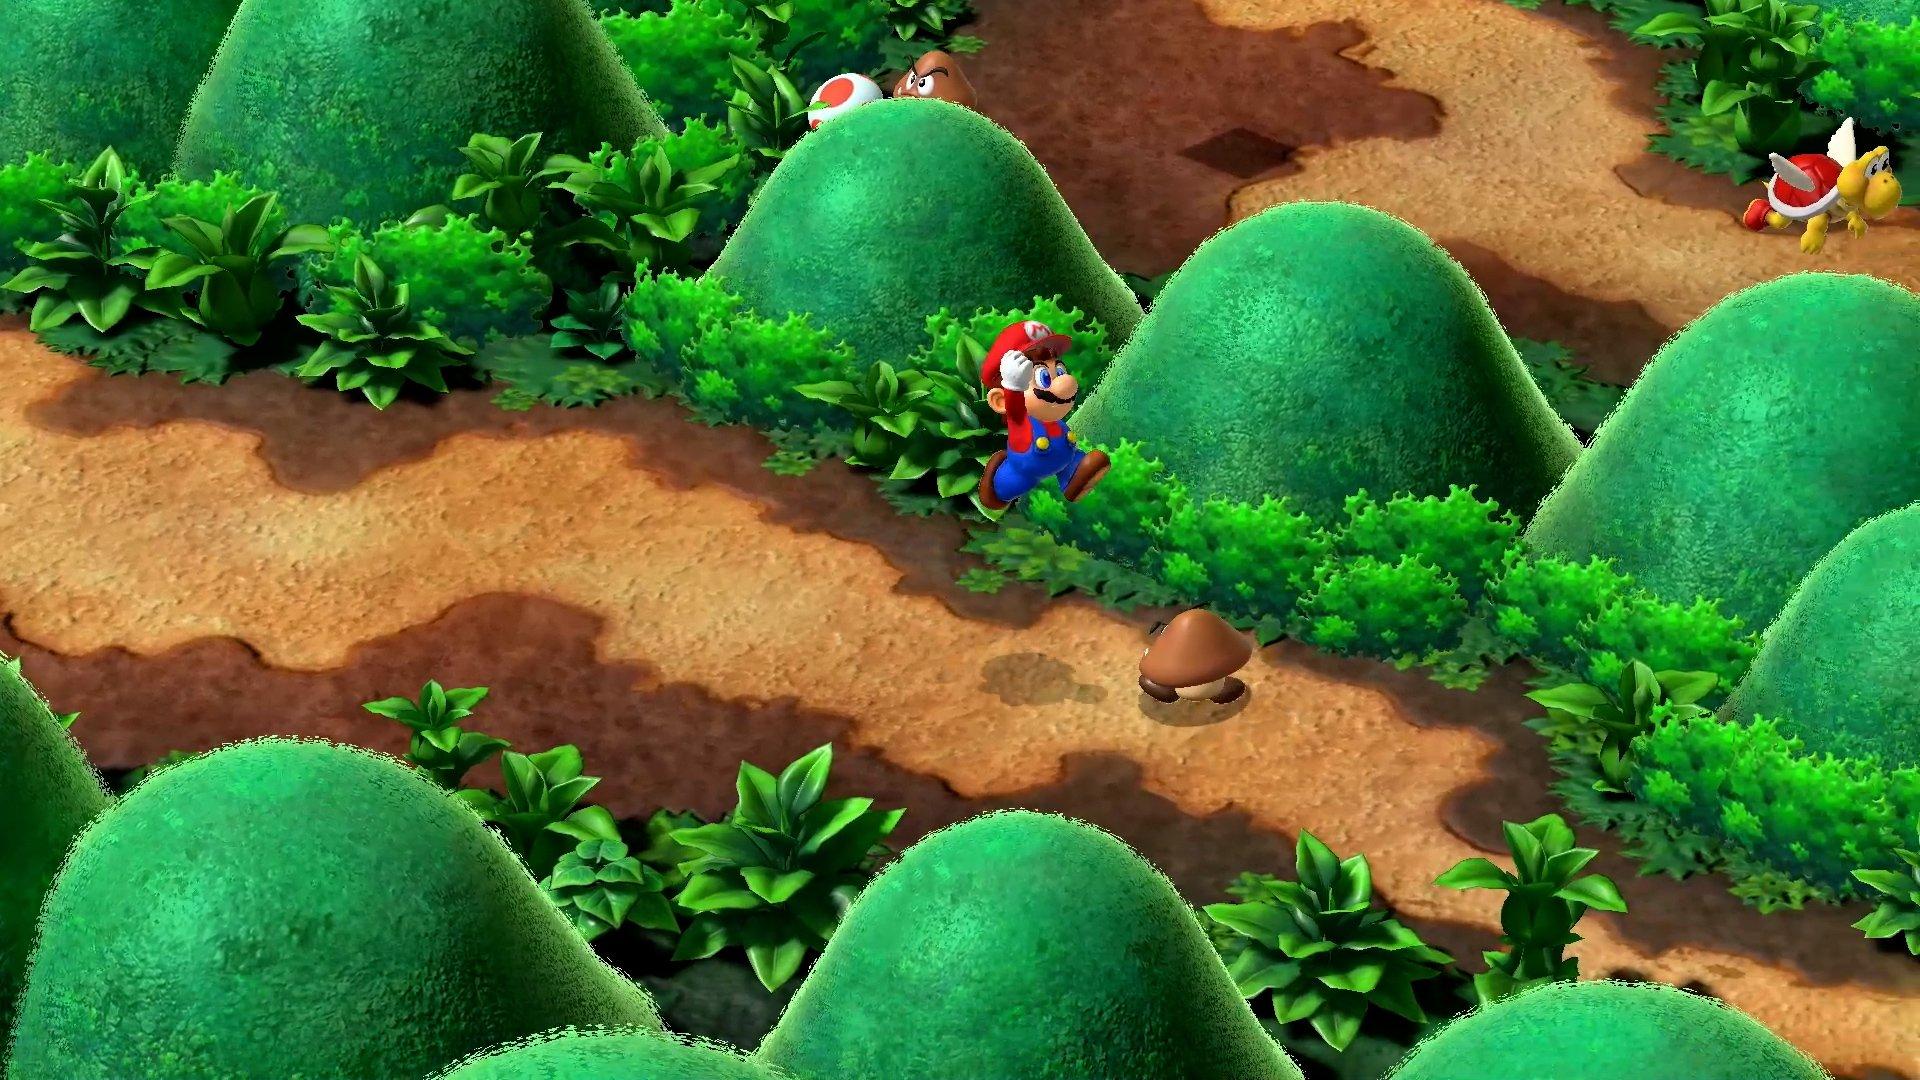 Here Are The Cheapest Copies Of Super Mario RPG In Australia